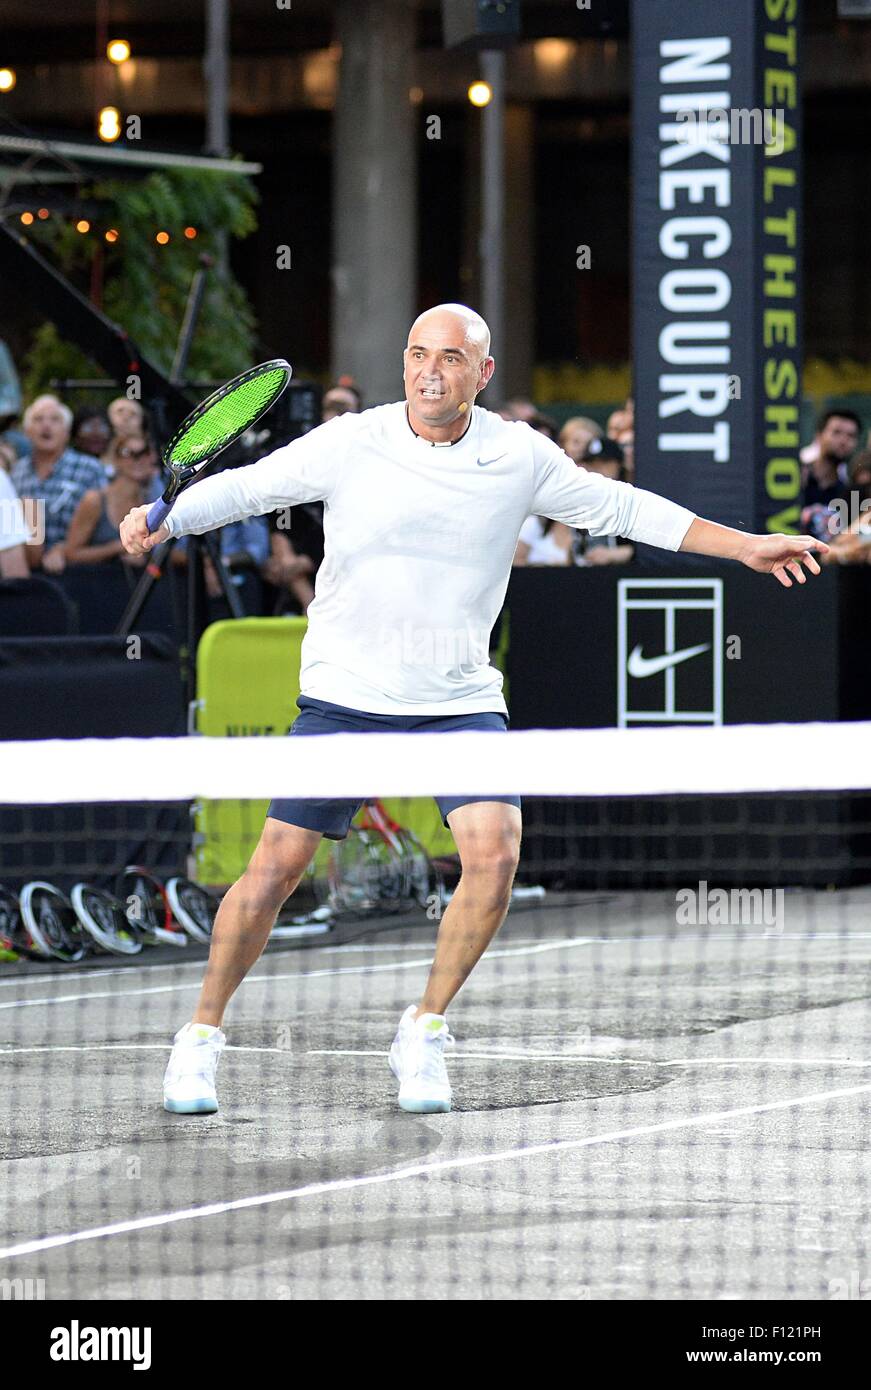 New York, NY, USA. 24th Aug, 2015. Andre Agassi in attendance for 20th  Anniversary Of Iconic Nike Street Tennis Ad, Washington Street, West  Village, New York, NY August 24, 2015. Credit: Kristin